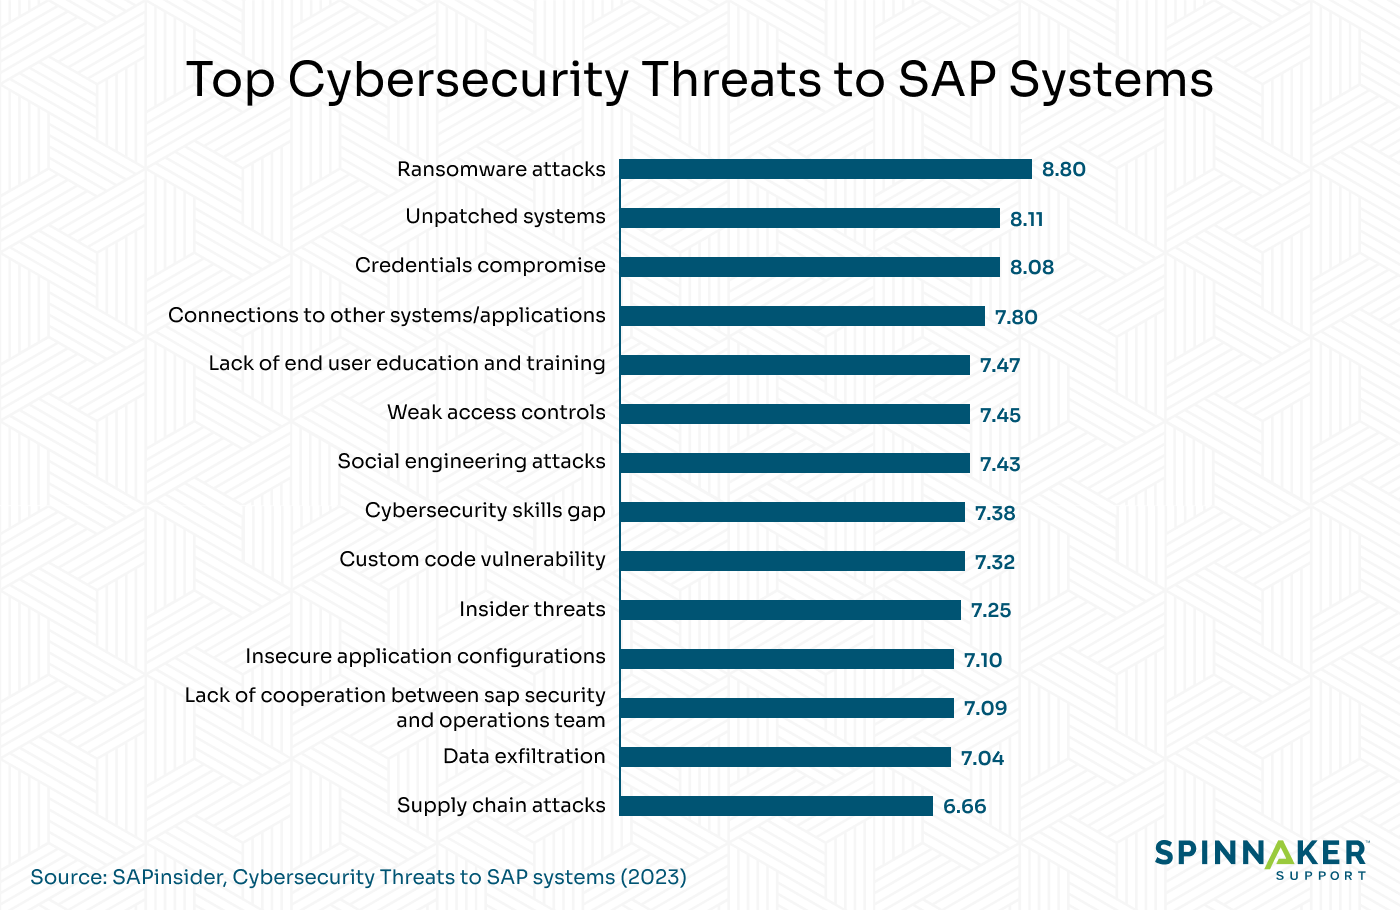 SAP security threats by severity